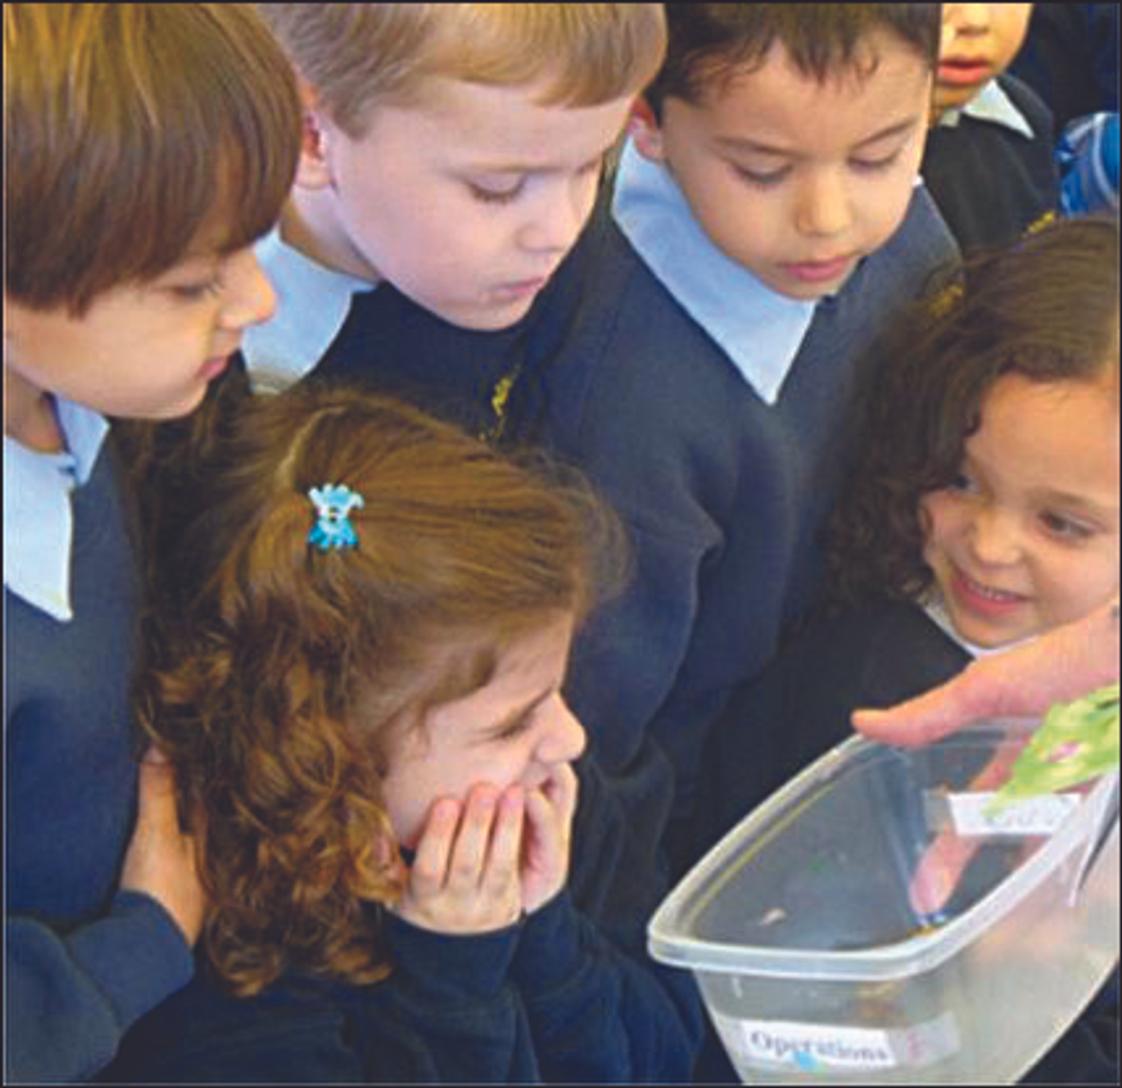 St. Nicholas School Photo - Children are given opportunities to discover the world around them through hands on activities, field trips, and scientific inquiry-based learning.